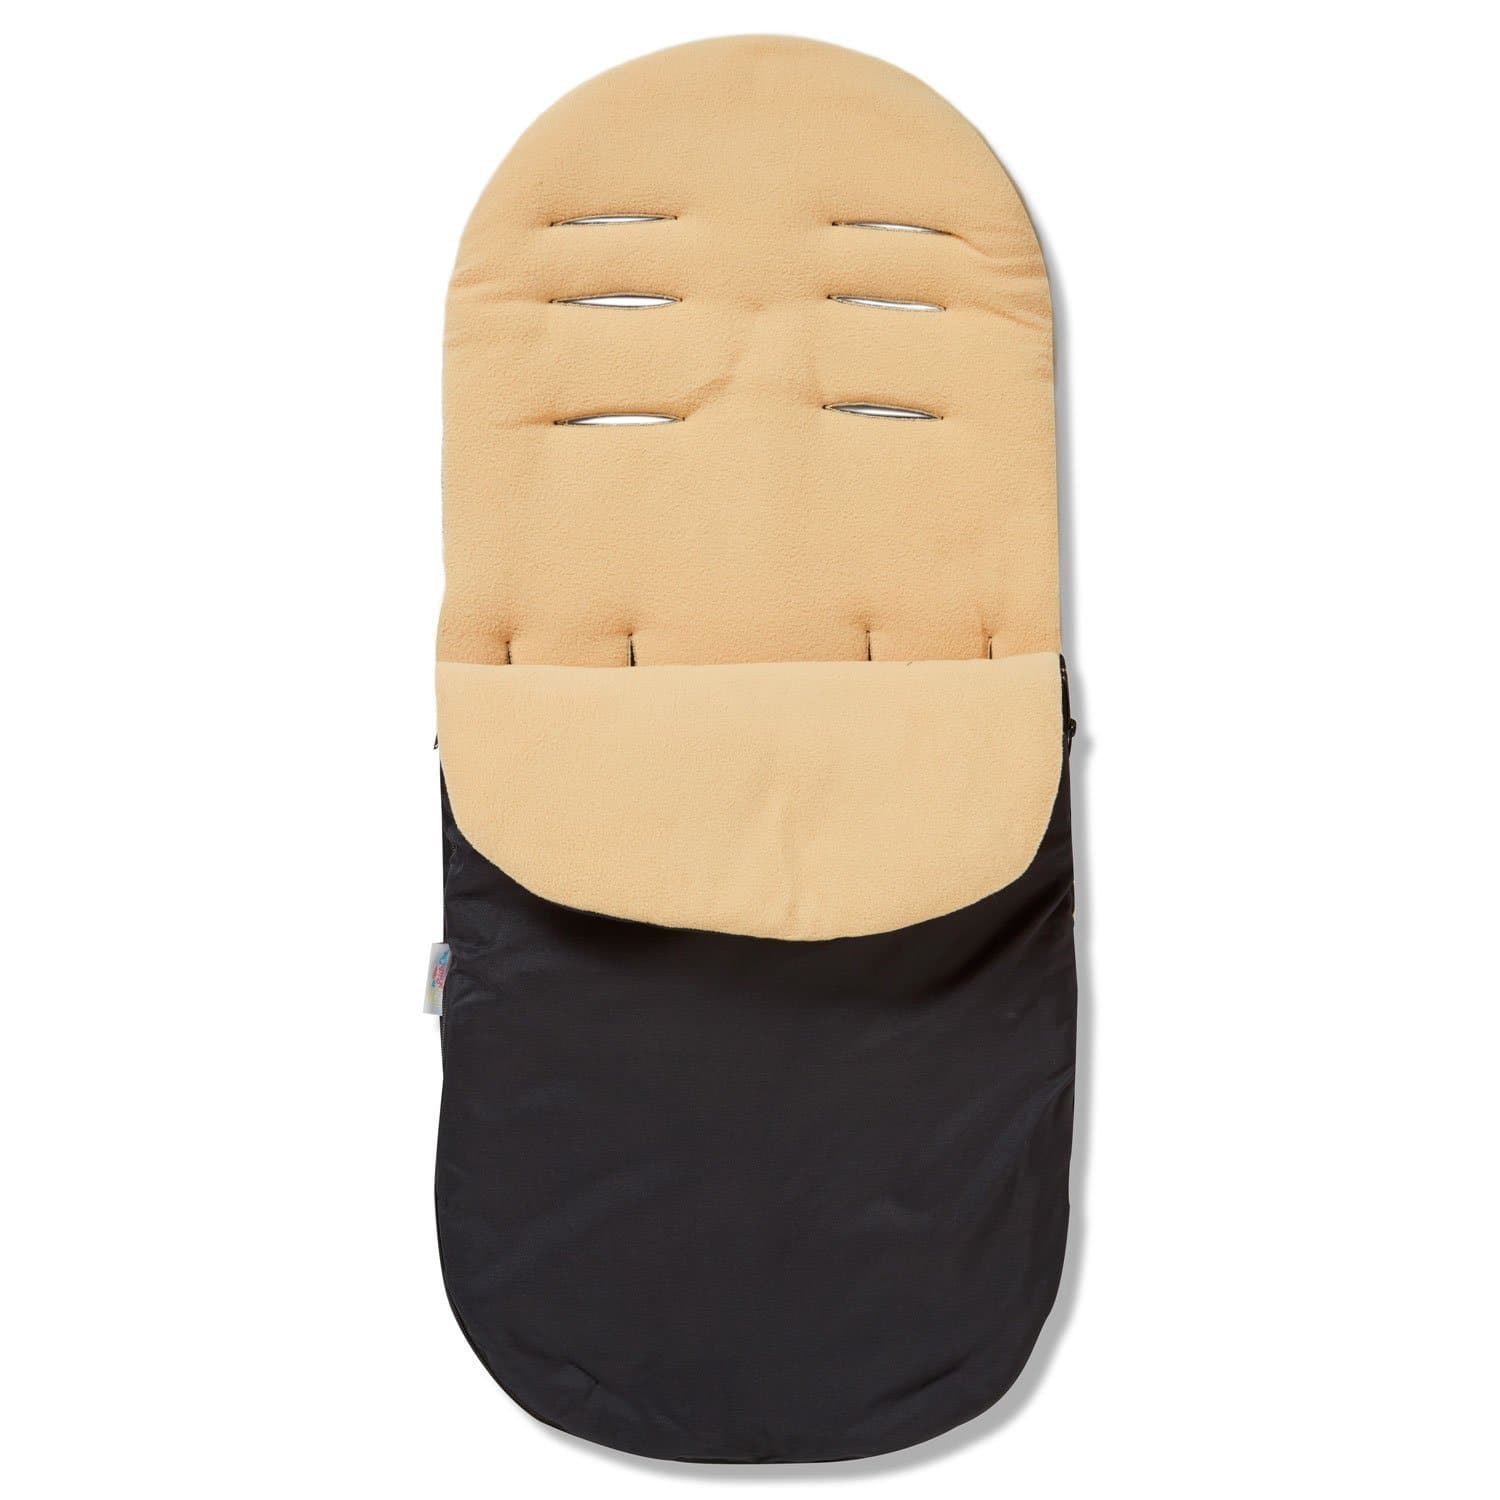 Footmuff / Cosy Toes Compatible with Bebe Confort - For Your Little One